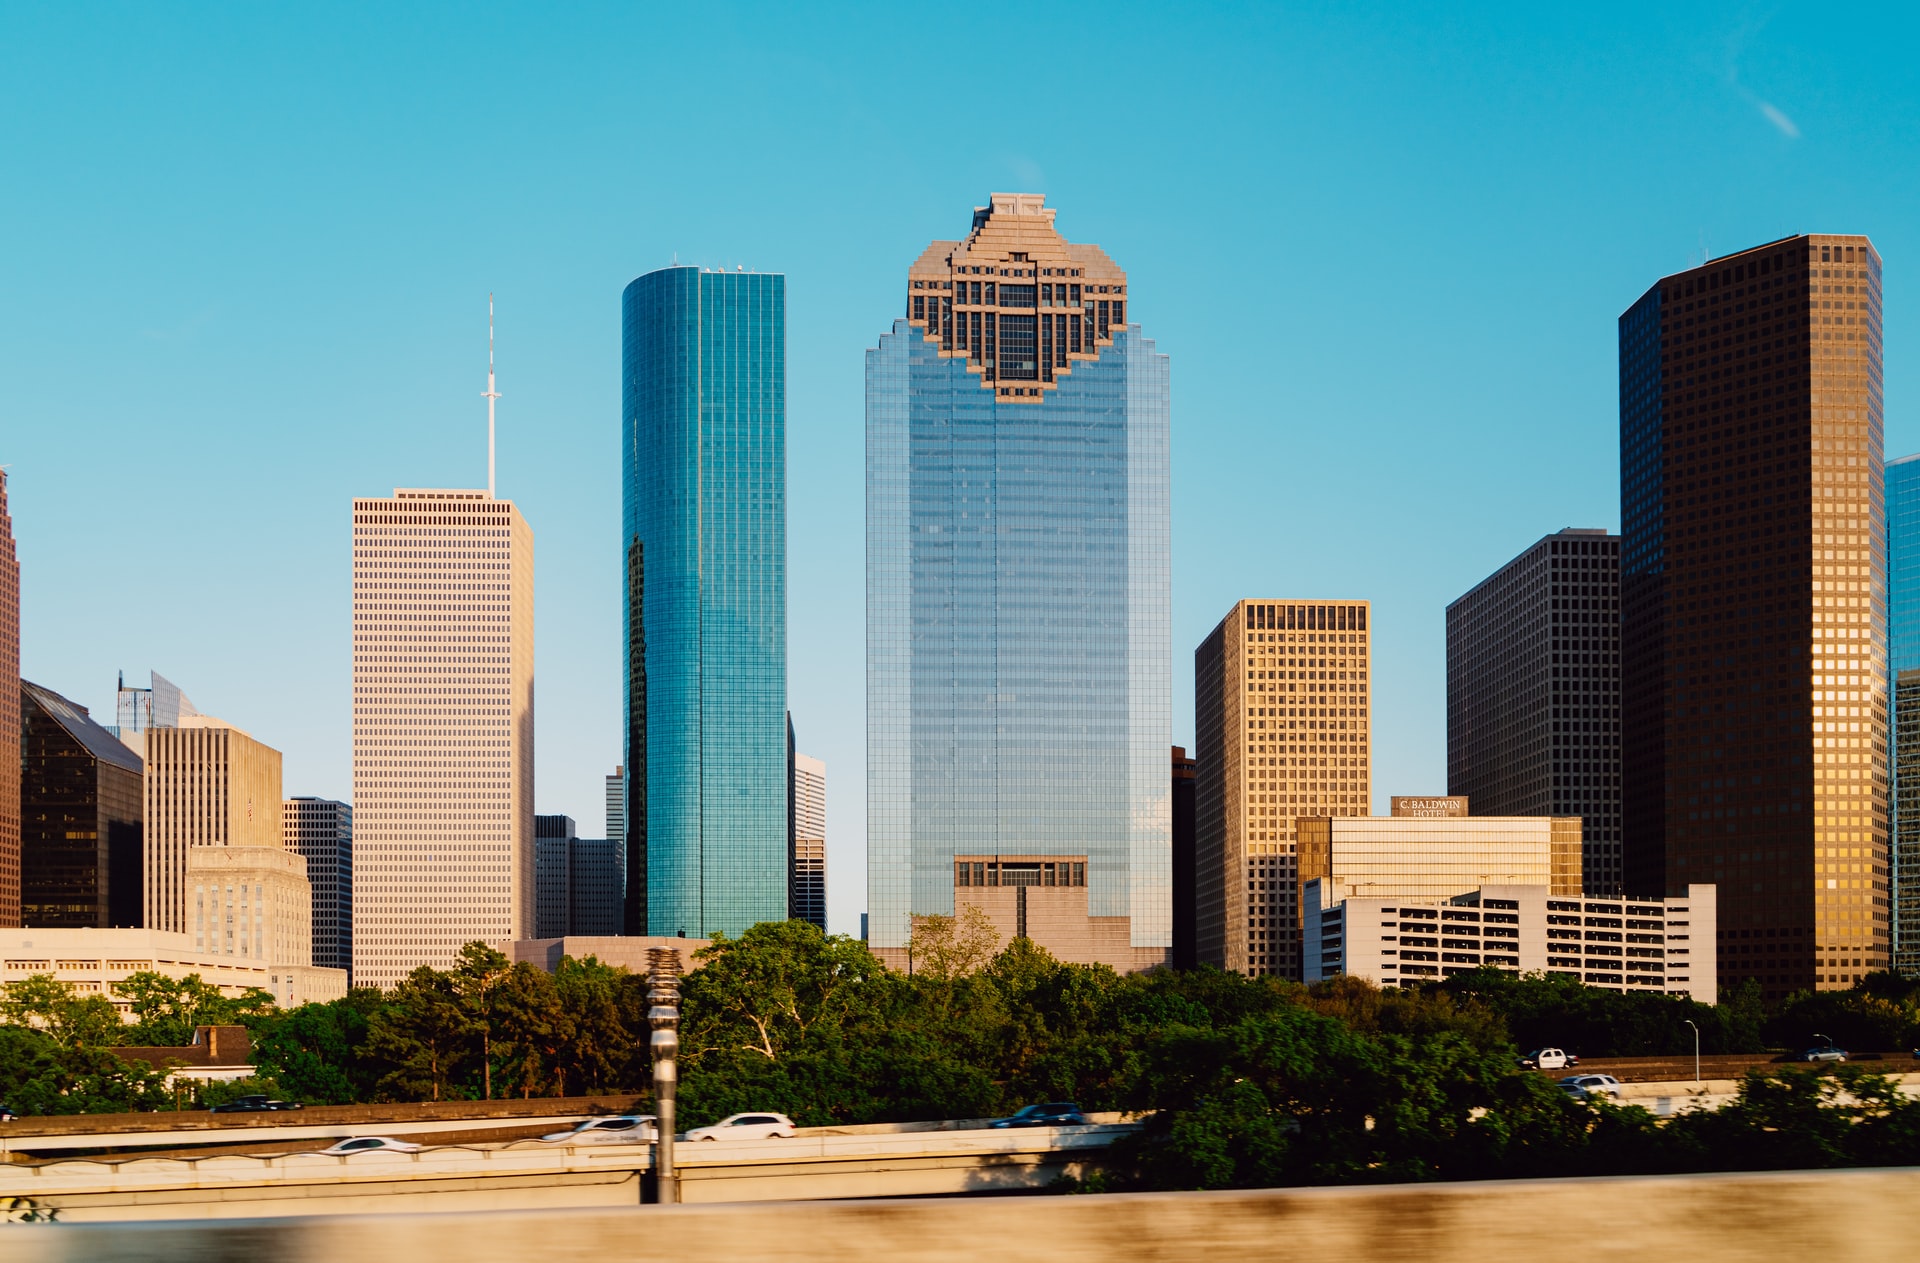 Moving from San Jose to Houston can really be an amazing experience, since there are a lot of amazing buildings in Houston and the weather is sunny